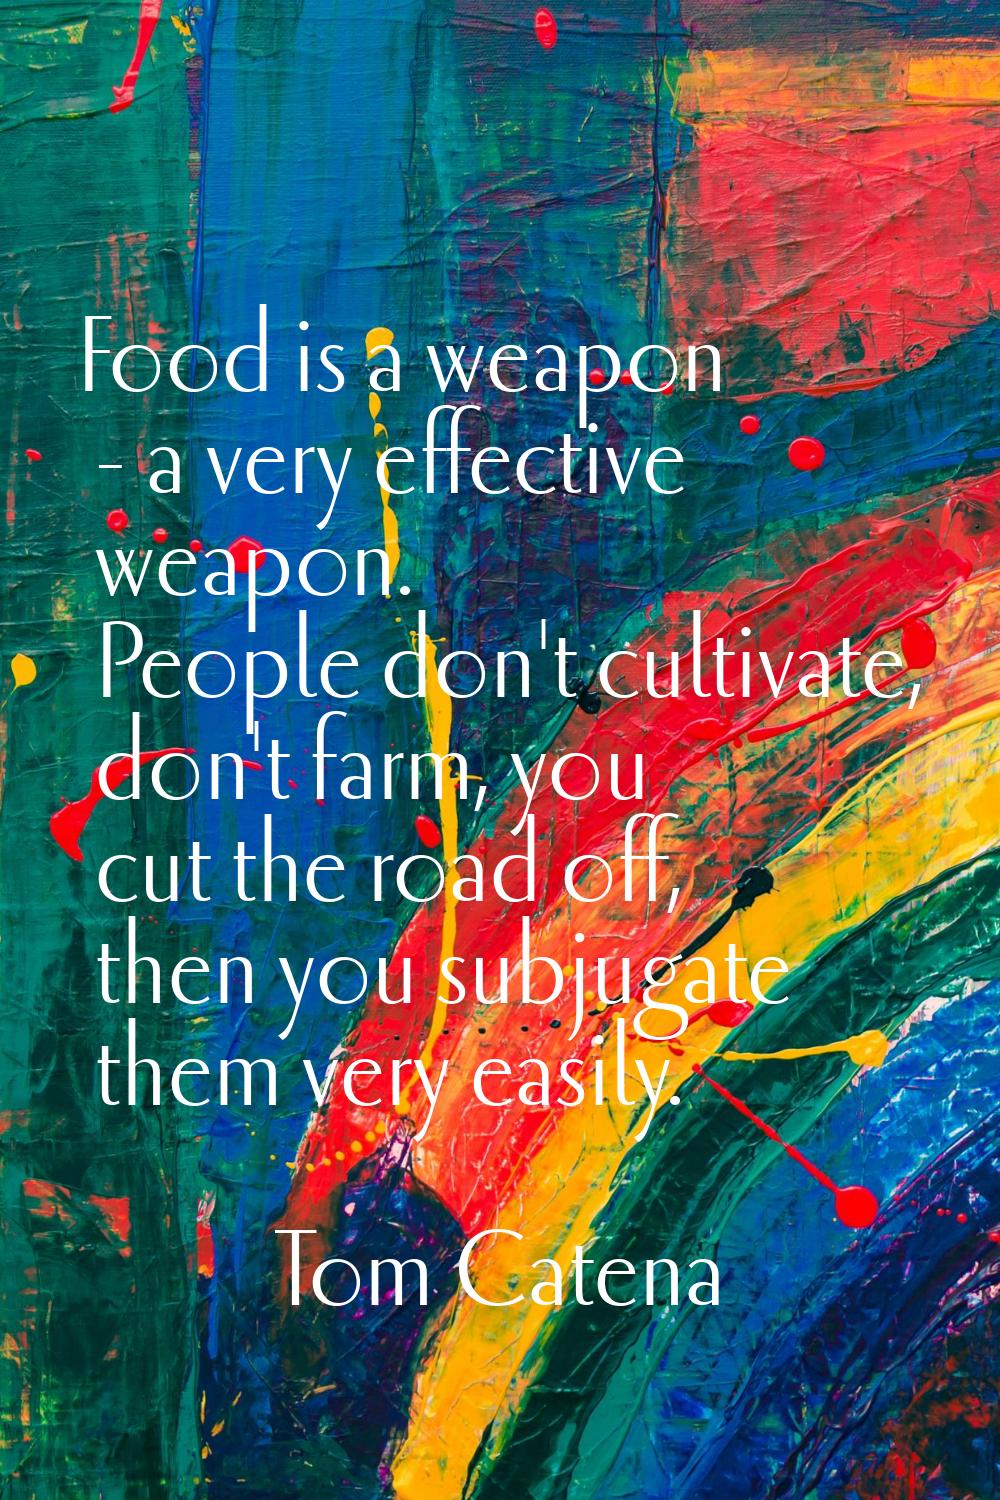 Food is a weapon - a very effective weapon. People don't cultivate, don't farm, you cut the road of